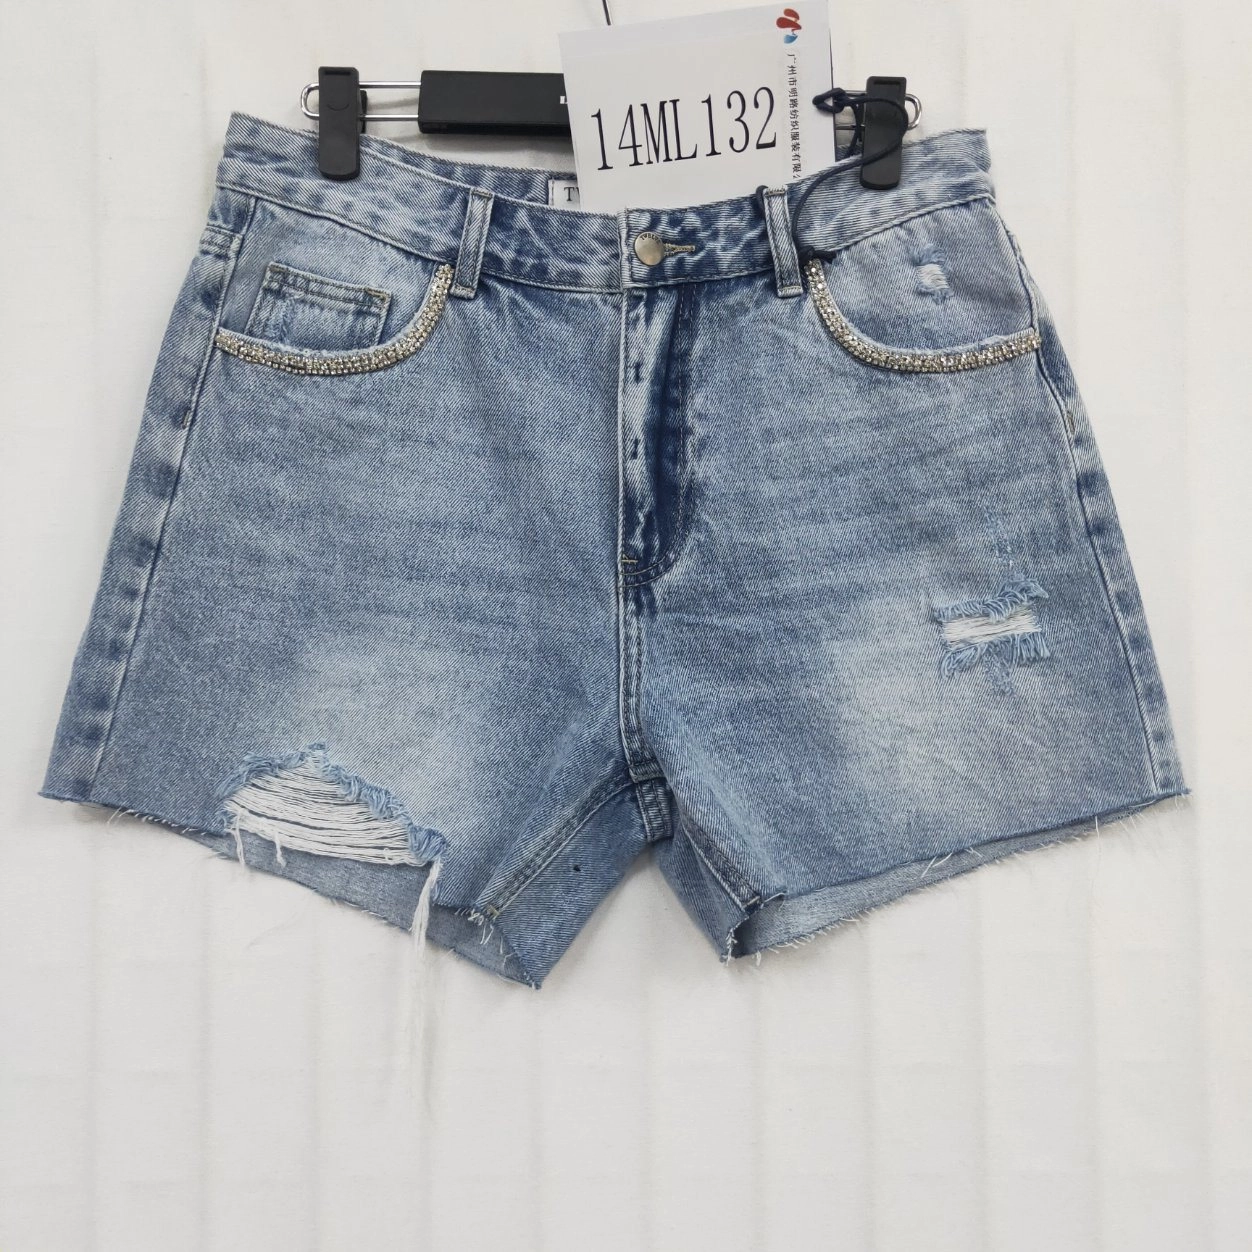 Light Blue Women Denim Shorts Jeans With Drill Studs At The Front Pocket For Ladies